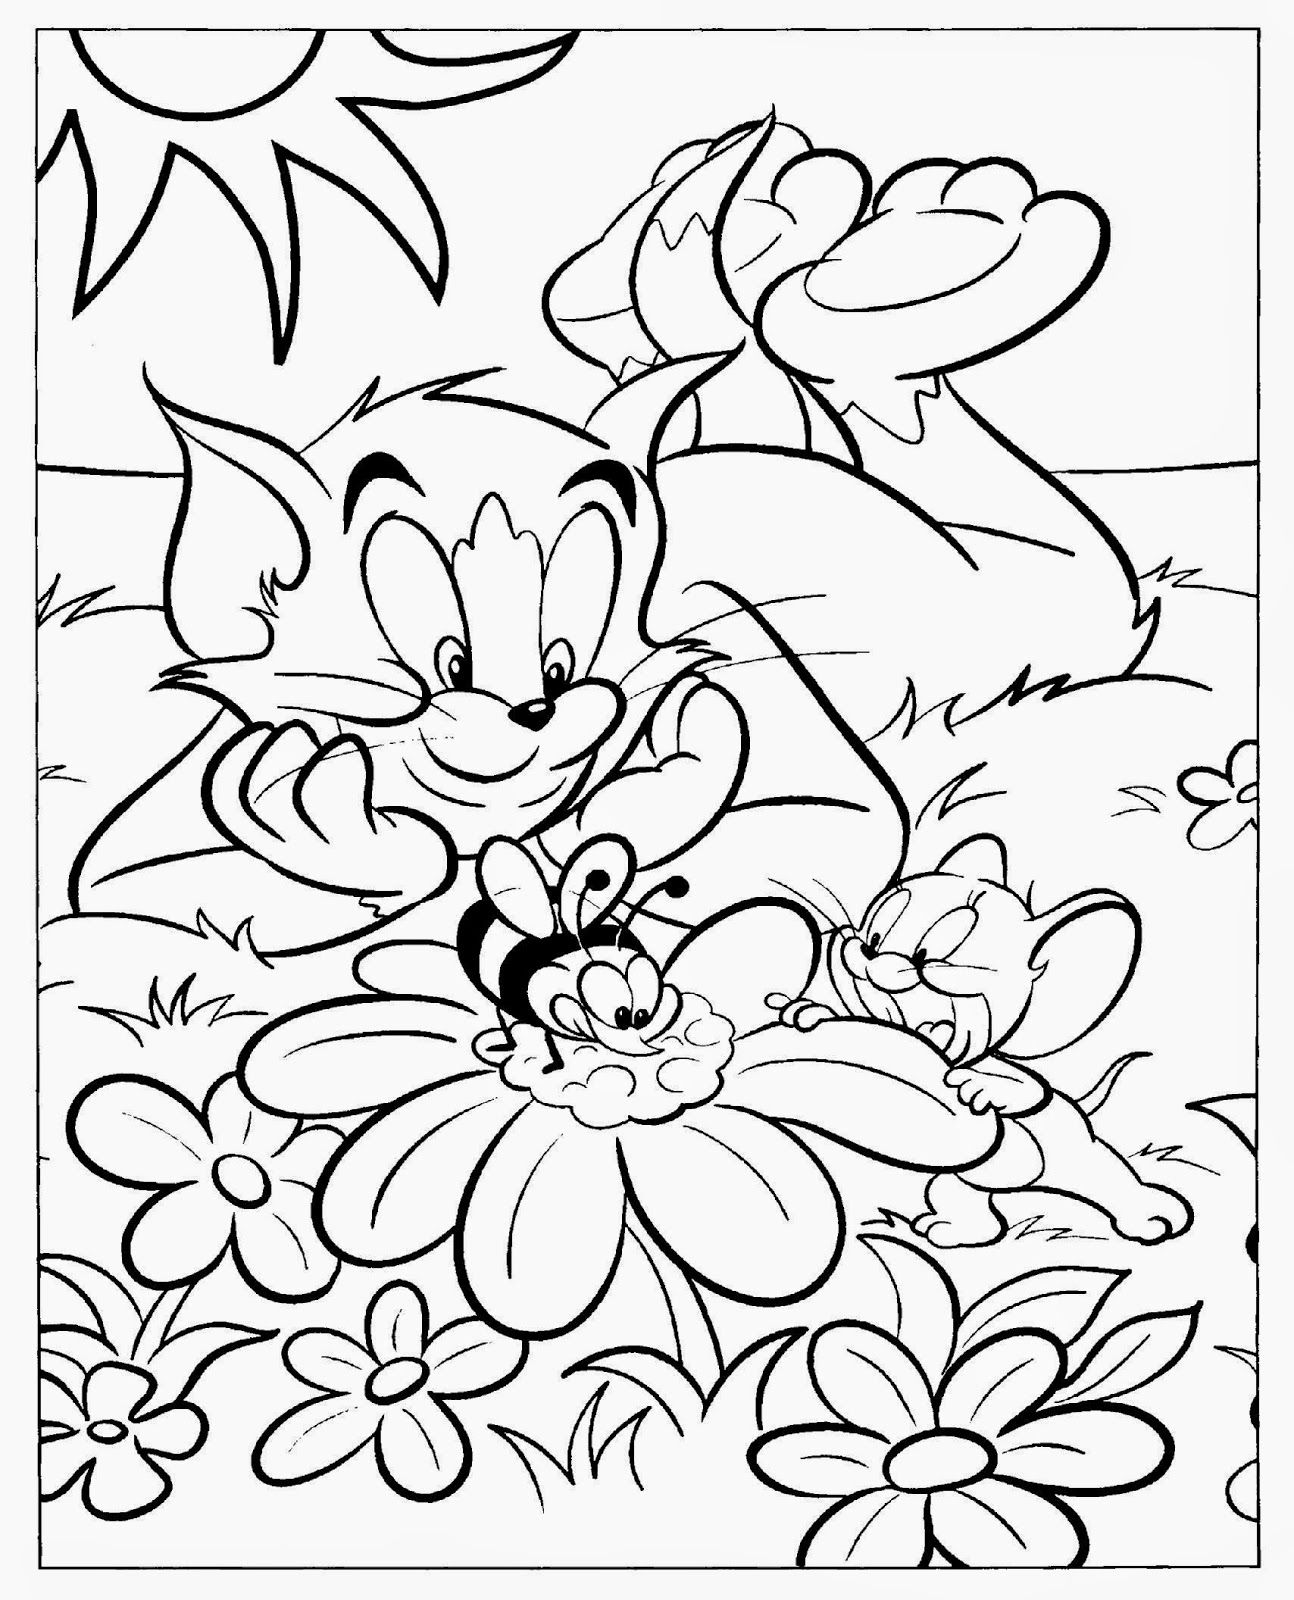 Free Coloring Pages Cartoon Network, Download Free Coloring Pages